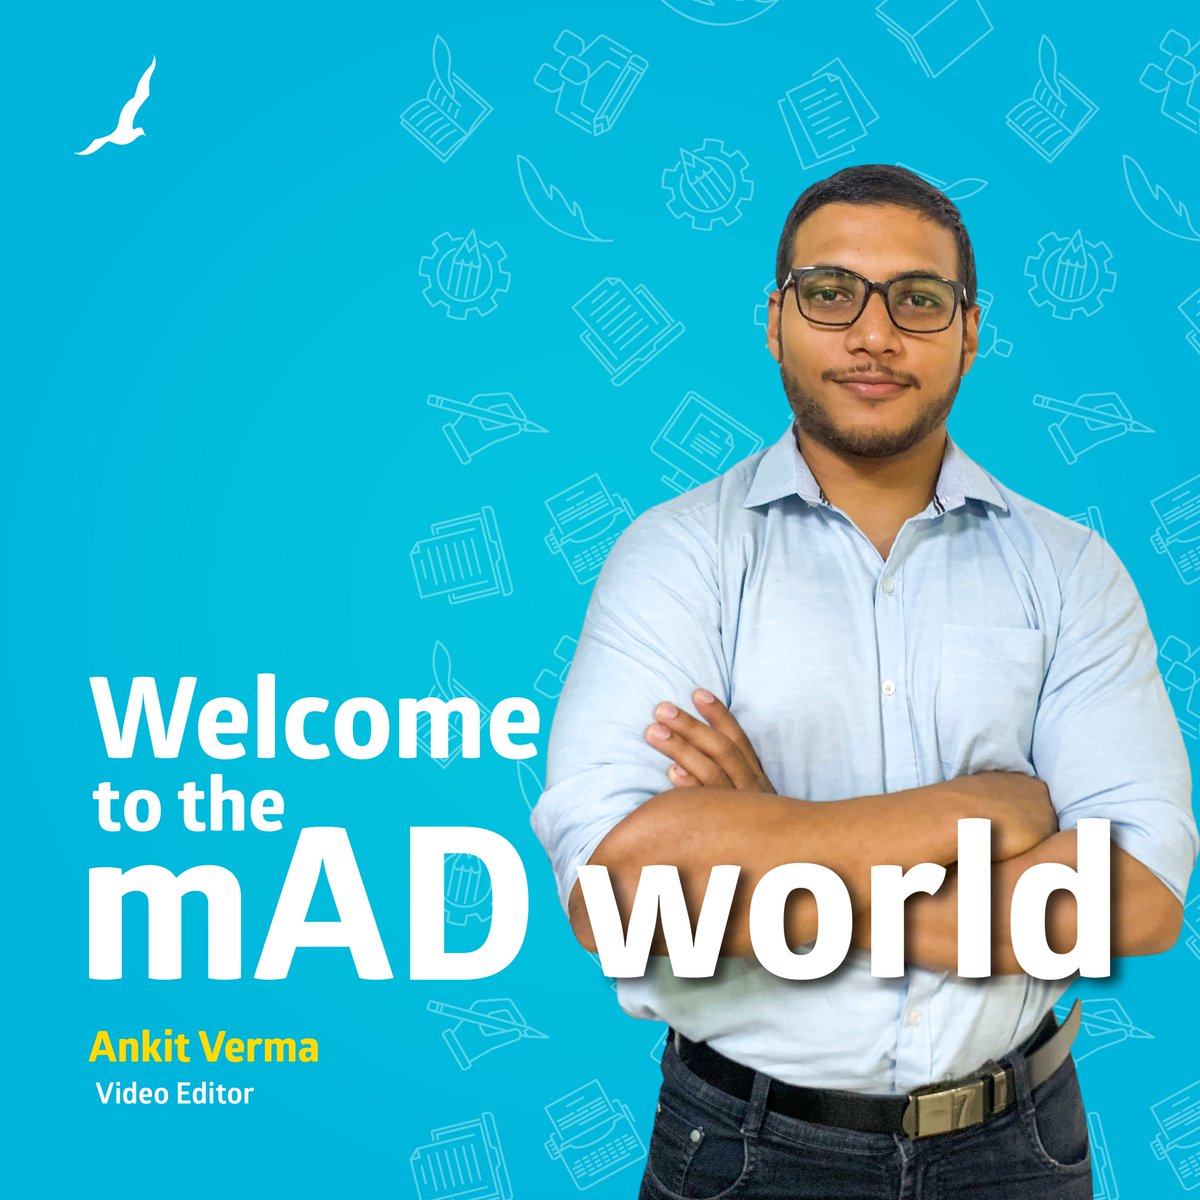 Meet Ankit Verma, our newest addition to the Creative team! With his video editing skills and strategic mind honed from playing chess, we’re set to soar together.
.
.
.
#SeagullAdvertising #NewJoinee #TeamGrowing #Welcome #AdvertisingAgency #Pune